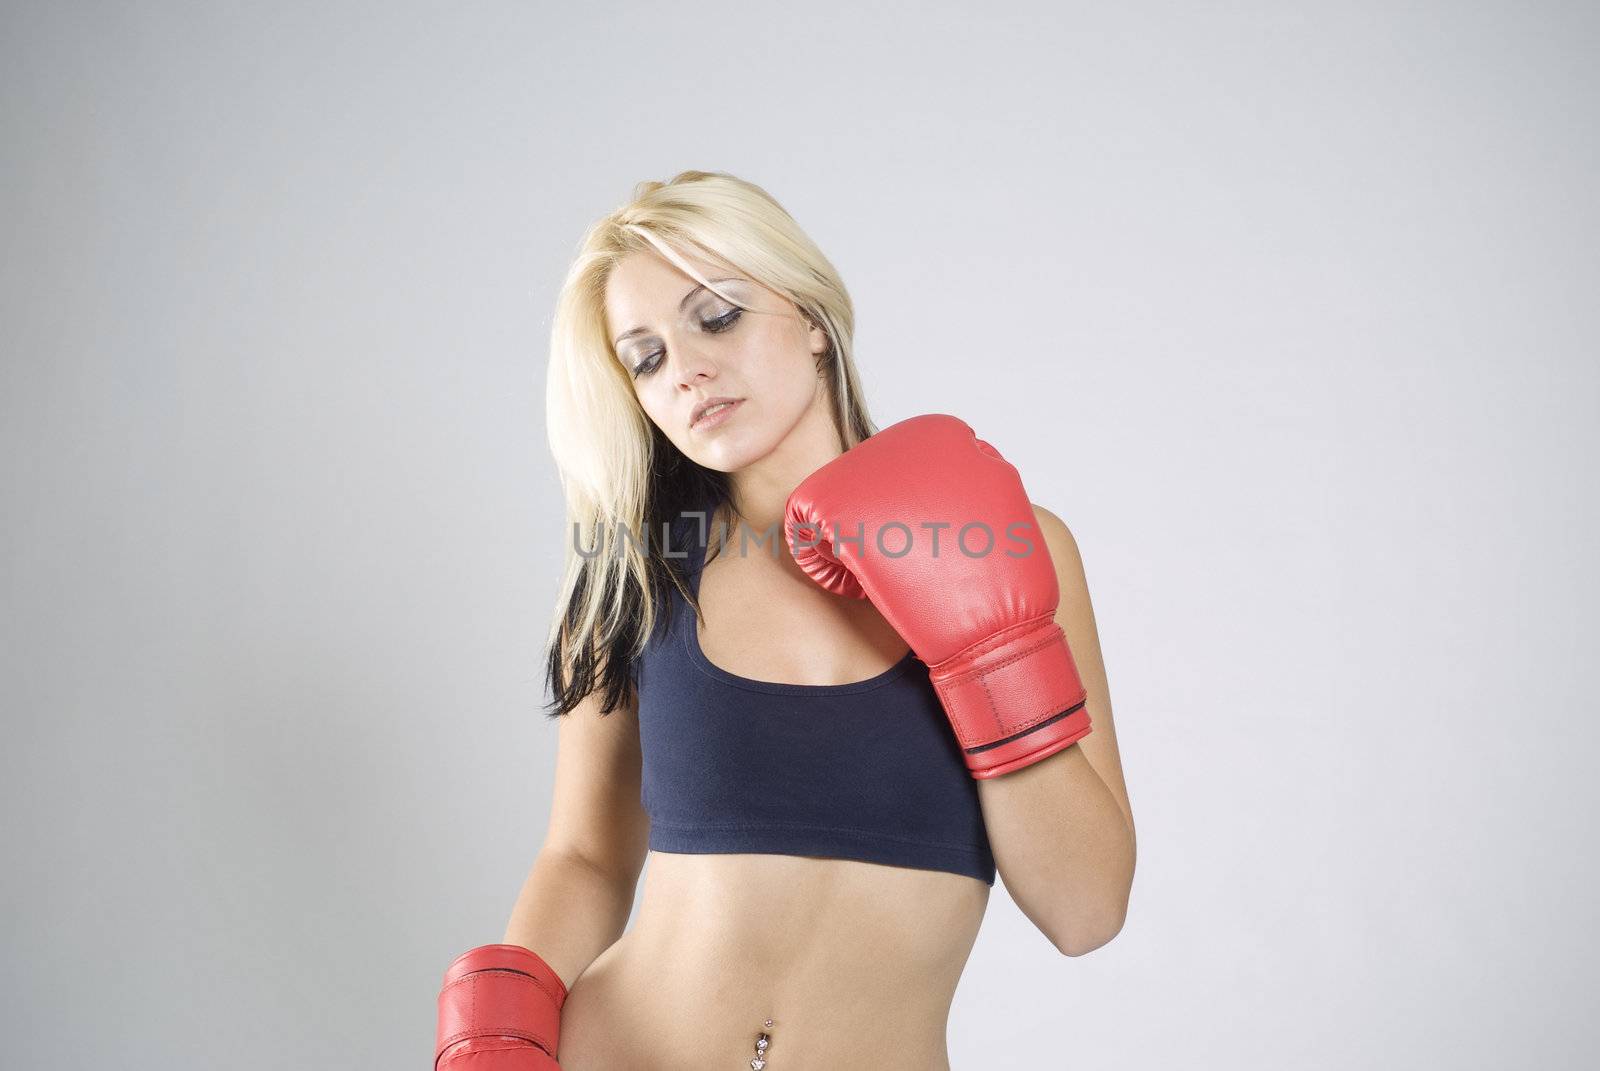 Elegant pose pretty fit blond woman boxer training or working out with red boxing gloves